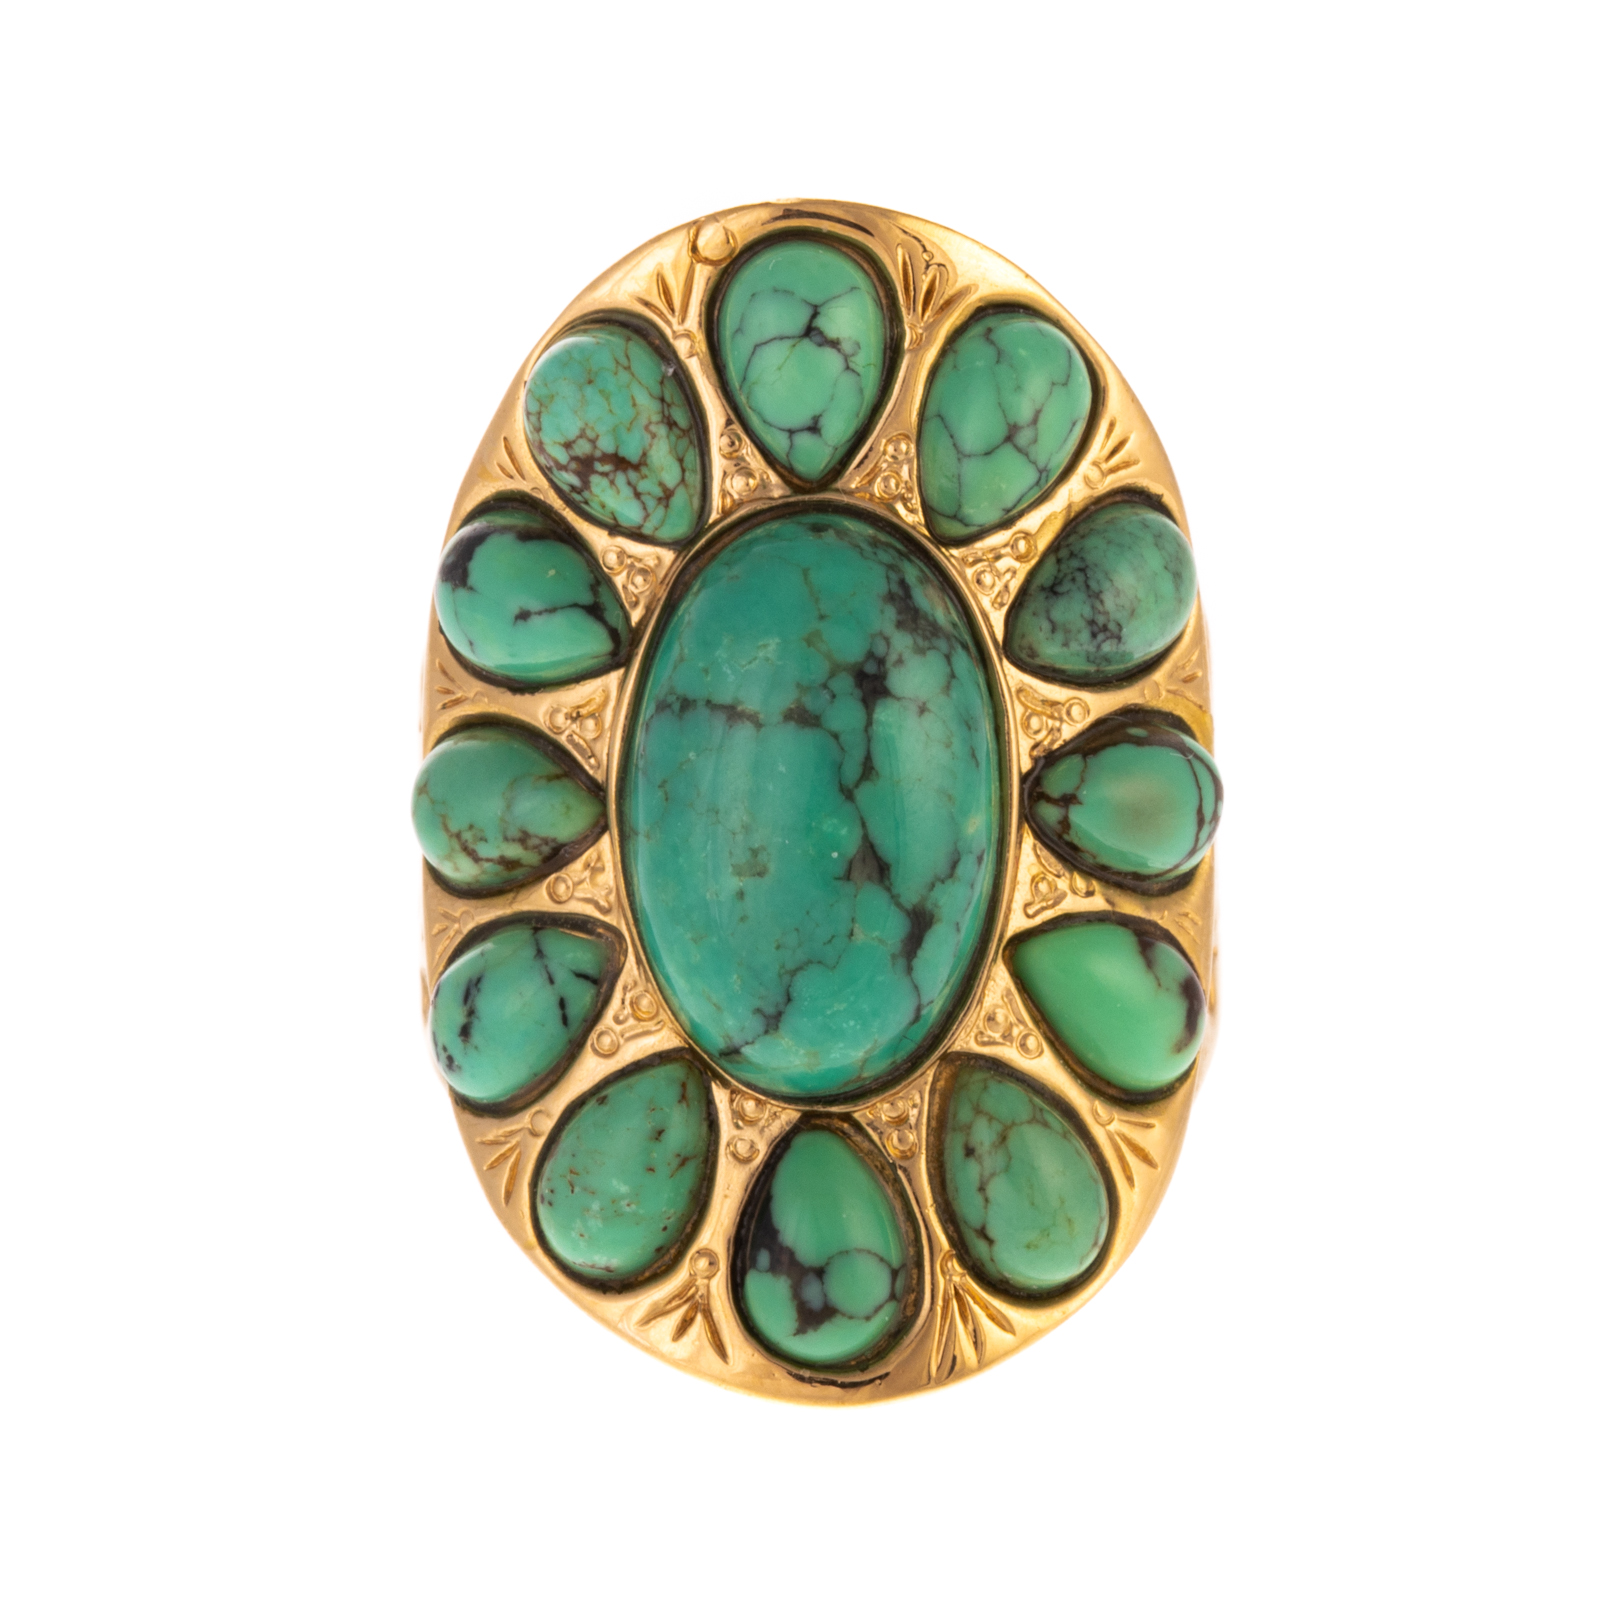 A LARGE TURQUOISE RING IN 10K,